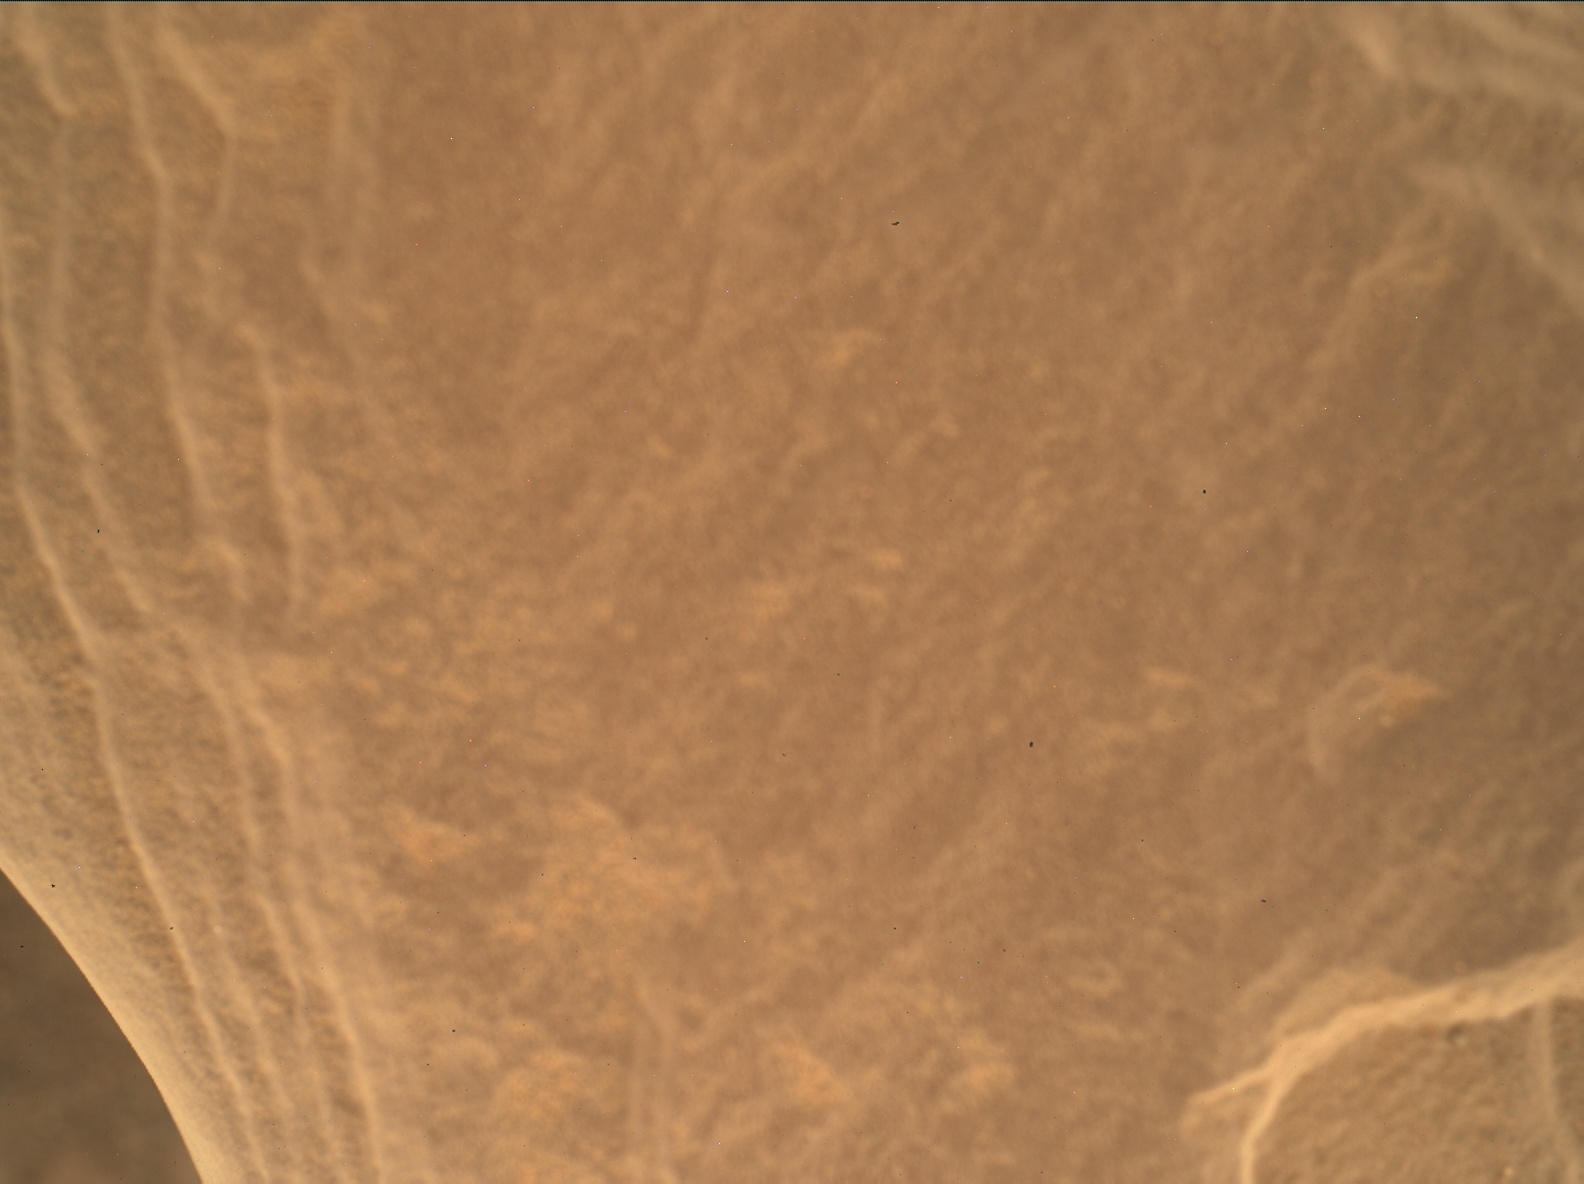 Nasa's Mars rover Curiosity acquired this image using its Mars Hand Lens Imager (MAHLI) on Sol 2434